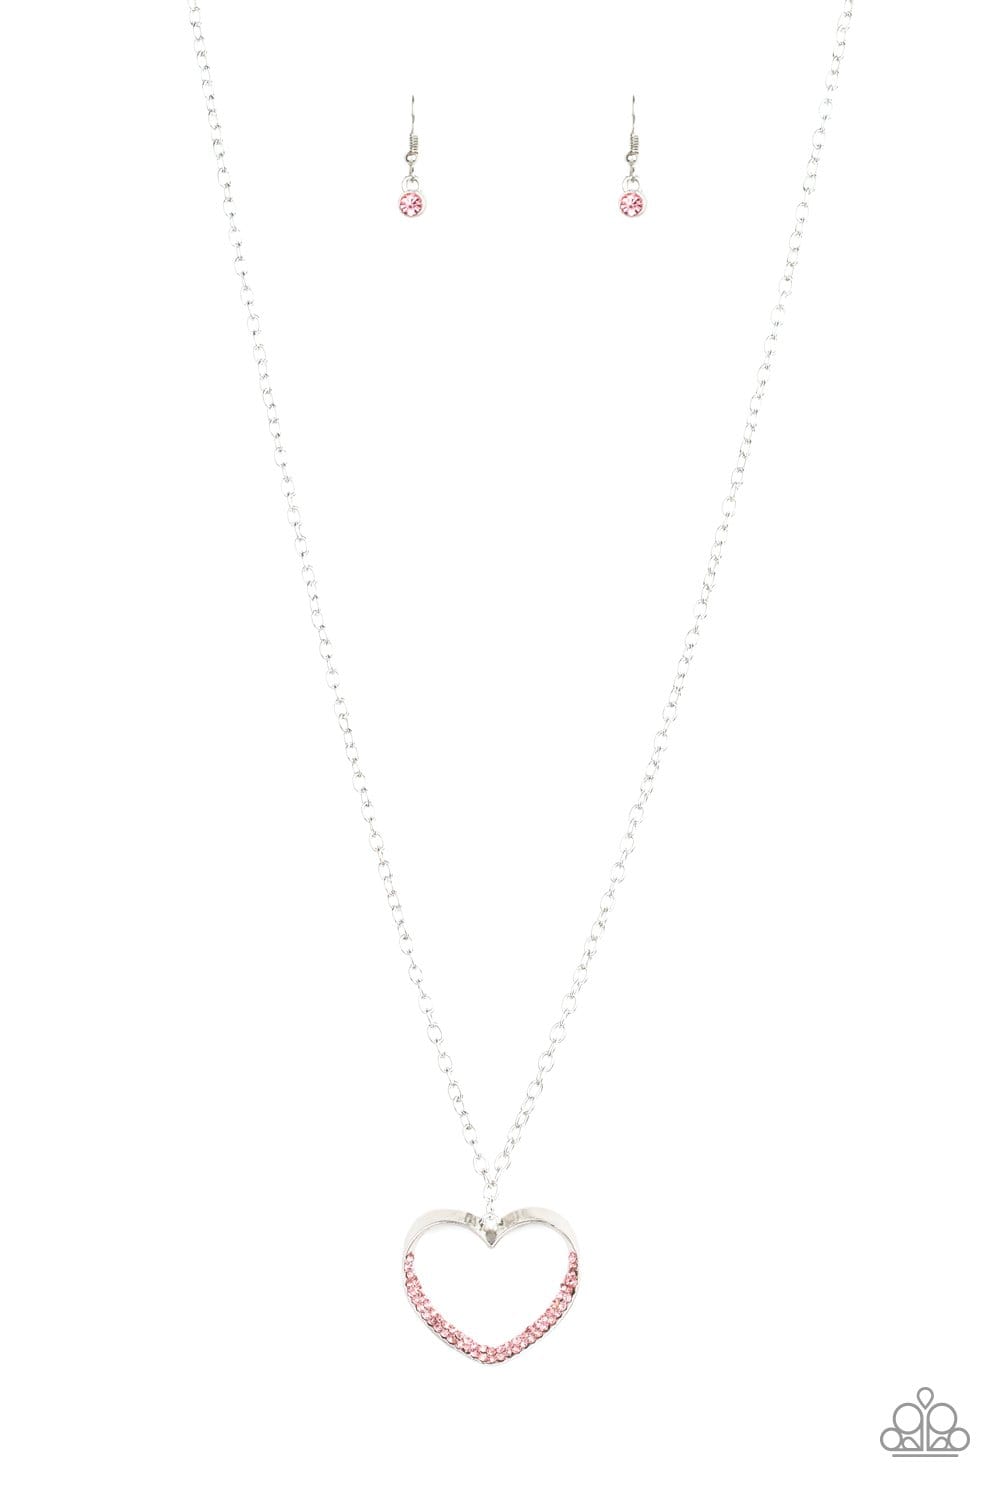 Paparazzi Bighearted Heart Necklaces